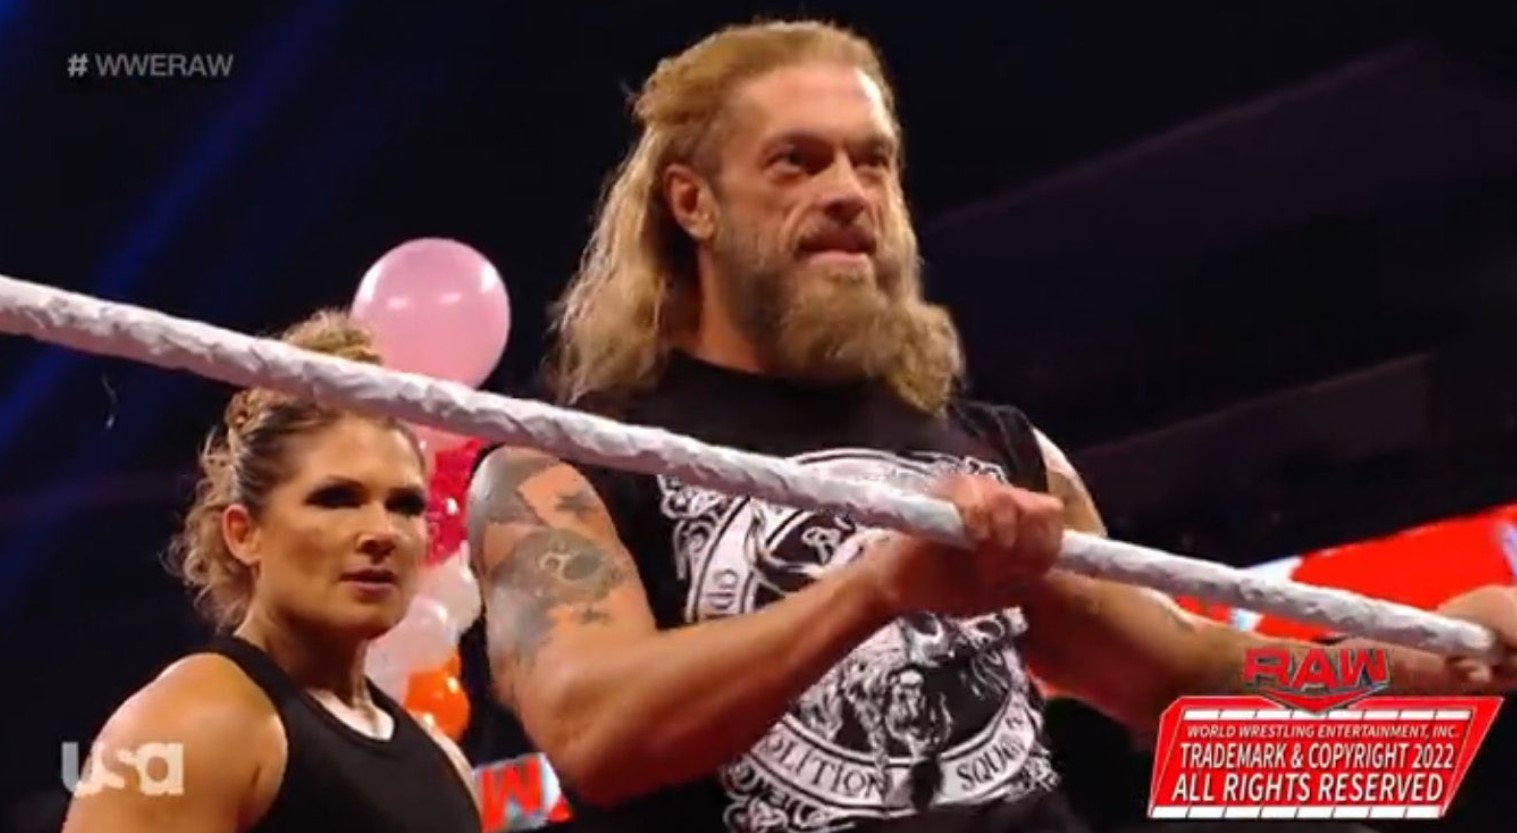 WWE Raw Results & Highlights: Edge and Beth Phoenix dismantled Maryse's Birthday Celebrations, Brock Lesnar made fun of Bobby Lashley again